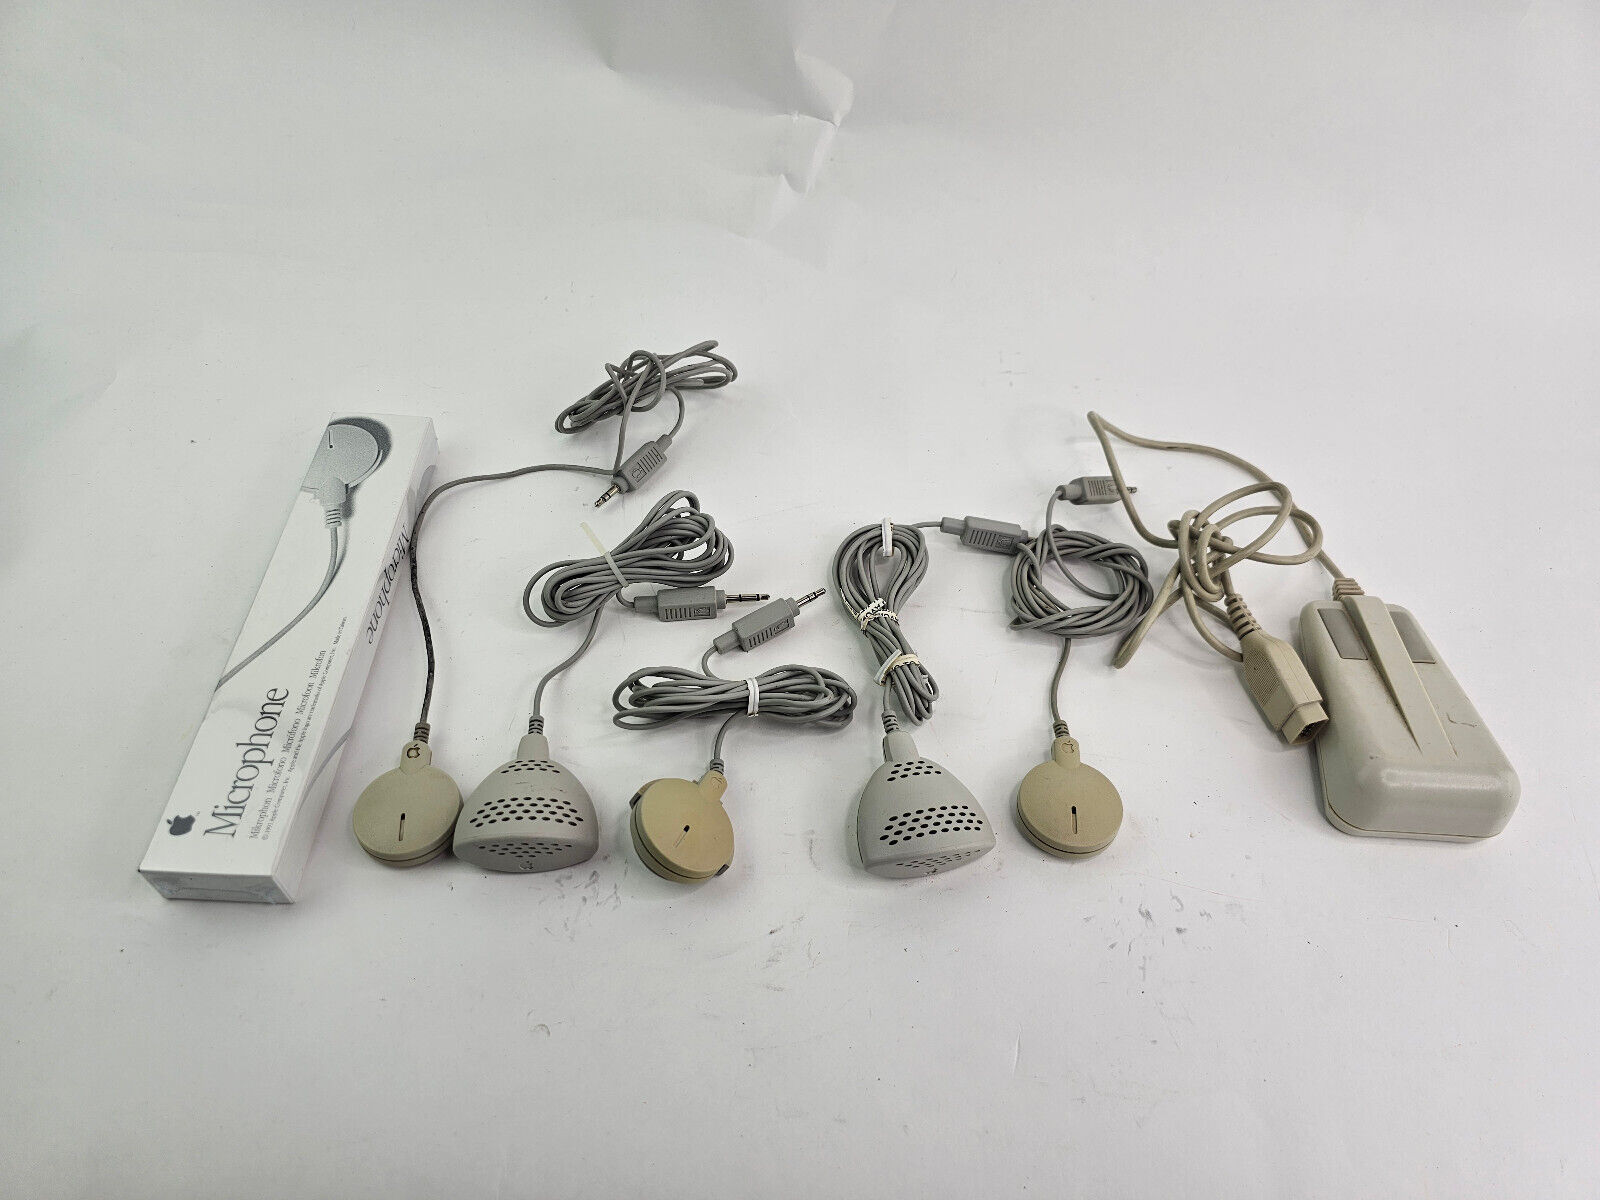 Vintage Apple Microphones and 1 Vintage Mouse untested